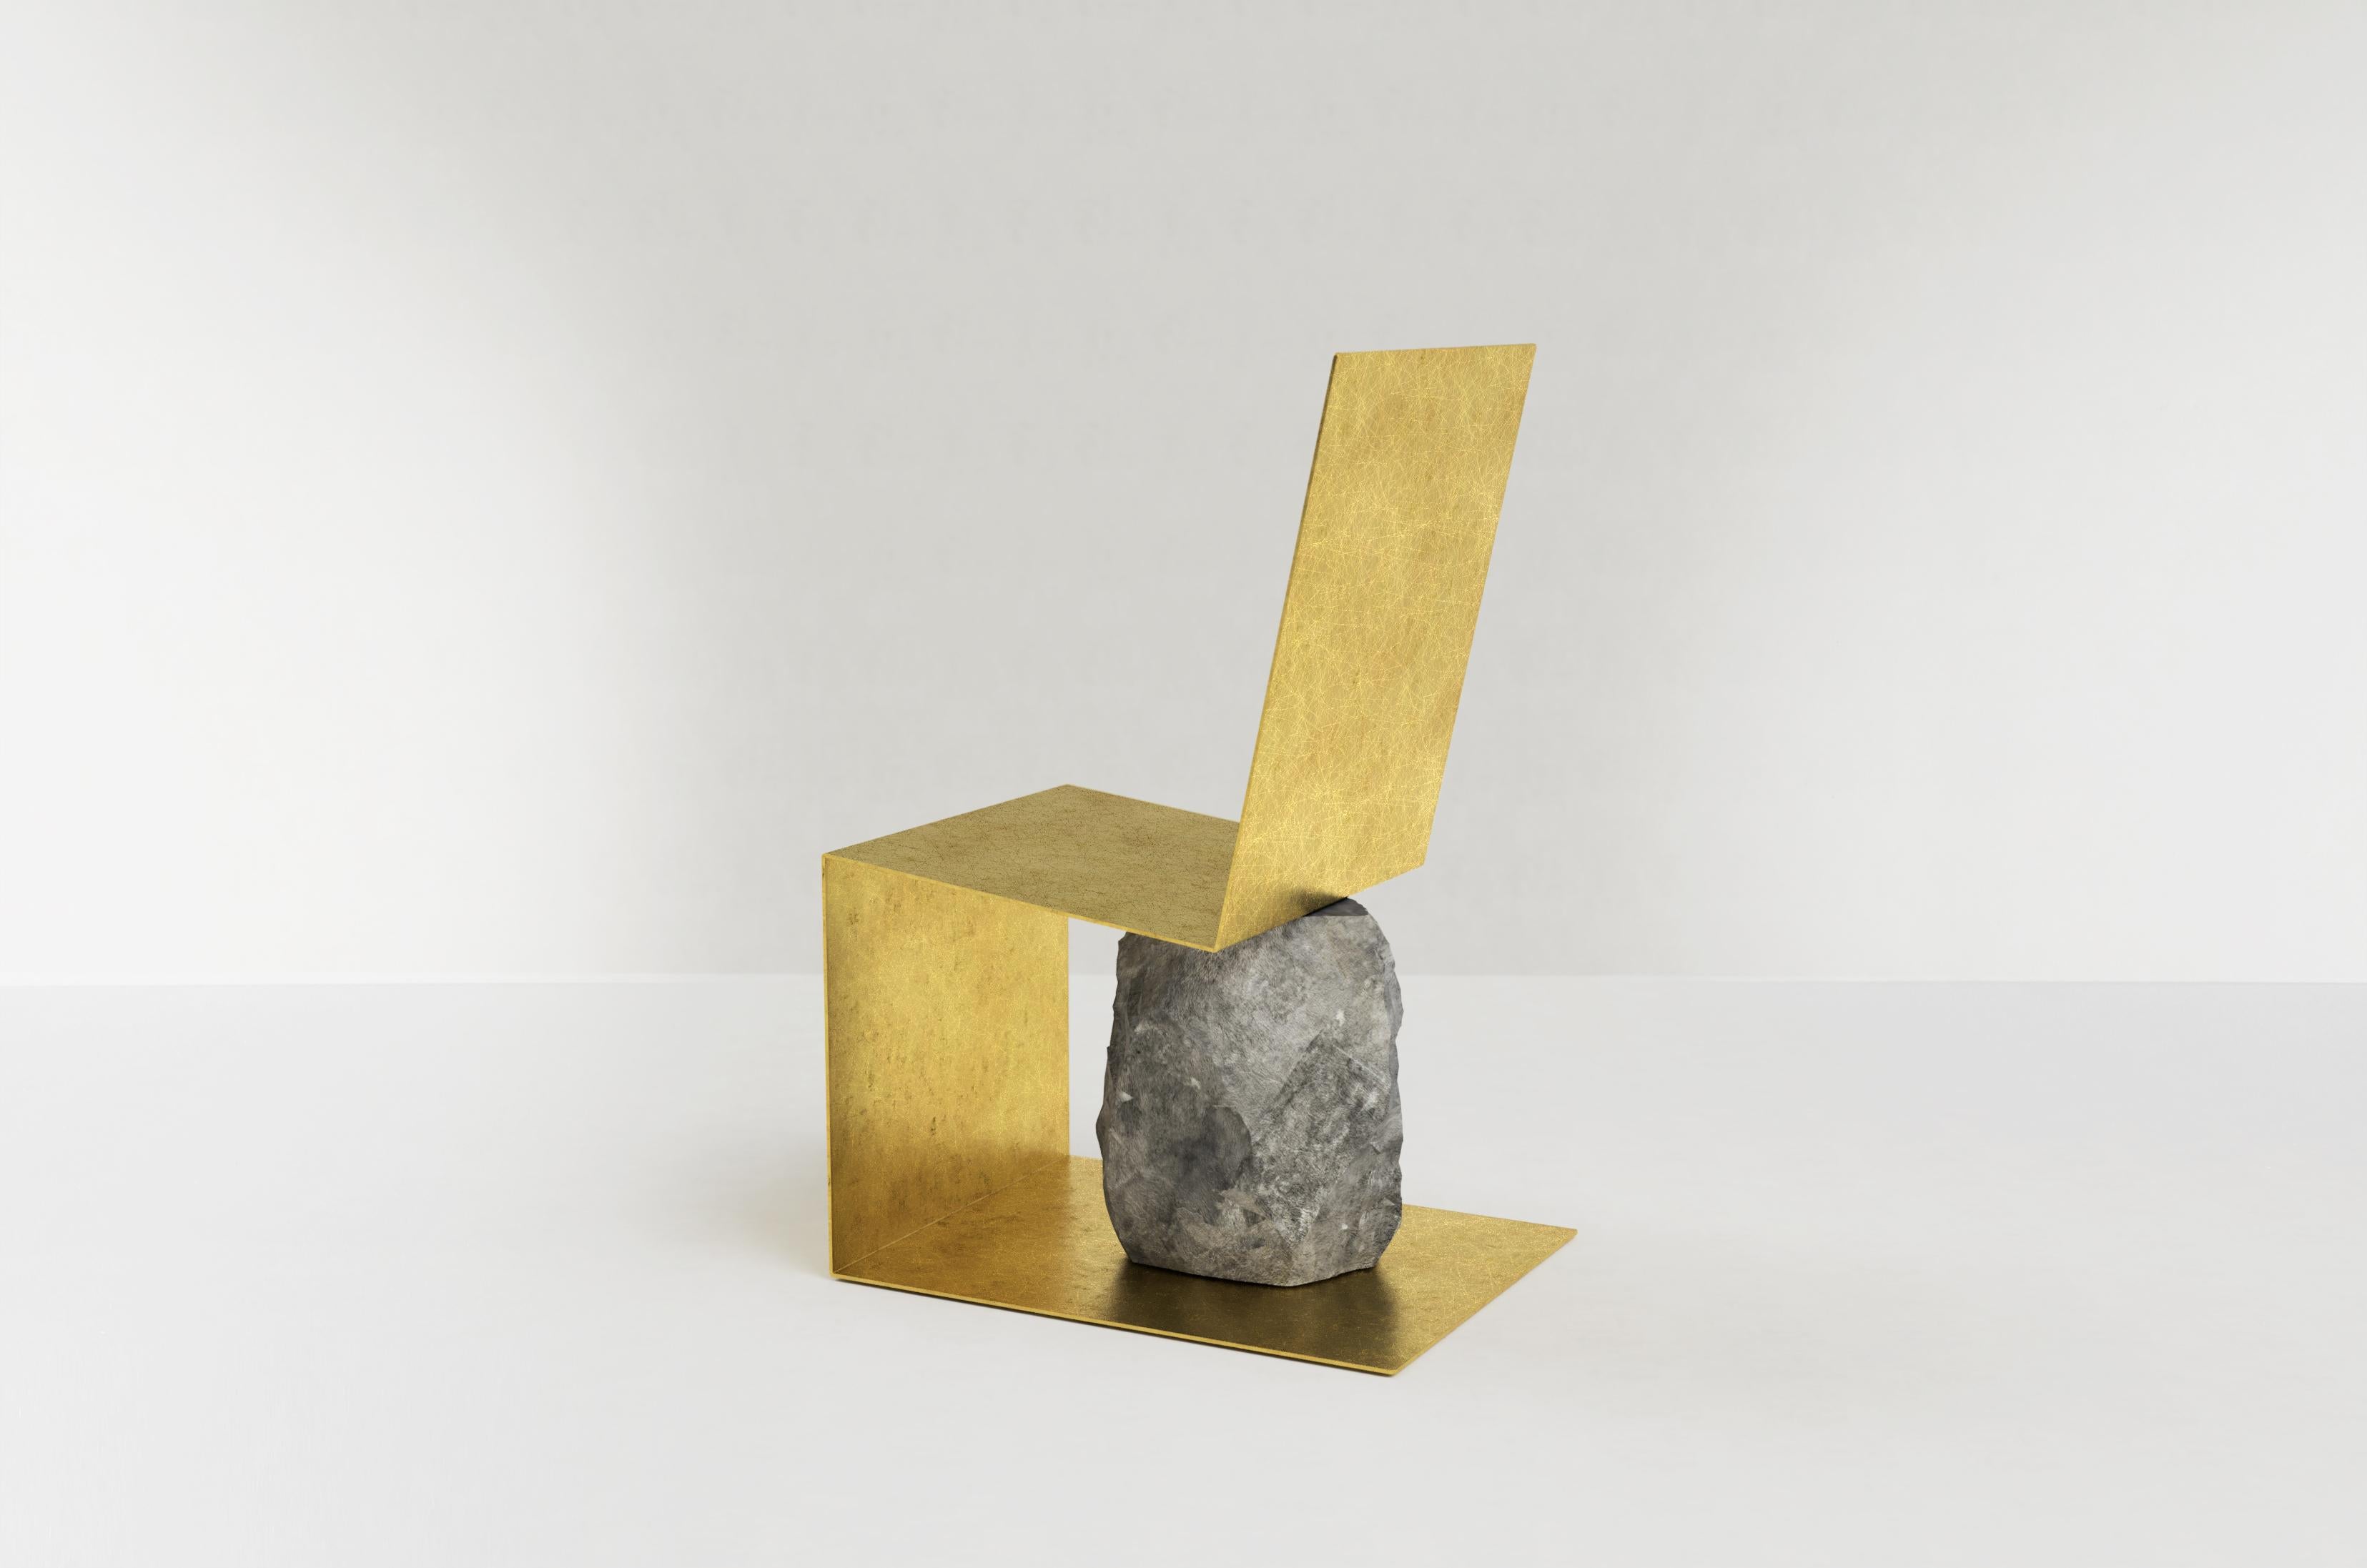 Hand brushed brass and stone chair by Batten and Kamp
Shelter to Ground collection
Signed
Limited edition of 12 + 2AP
Dimensions: W 48 x D 61 x H 95 cm
Materials: Hand brushed brass, granite

The stone is sourced first, and then the proportions of